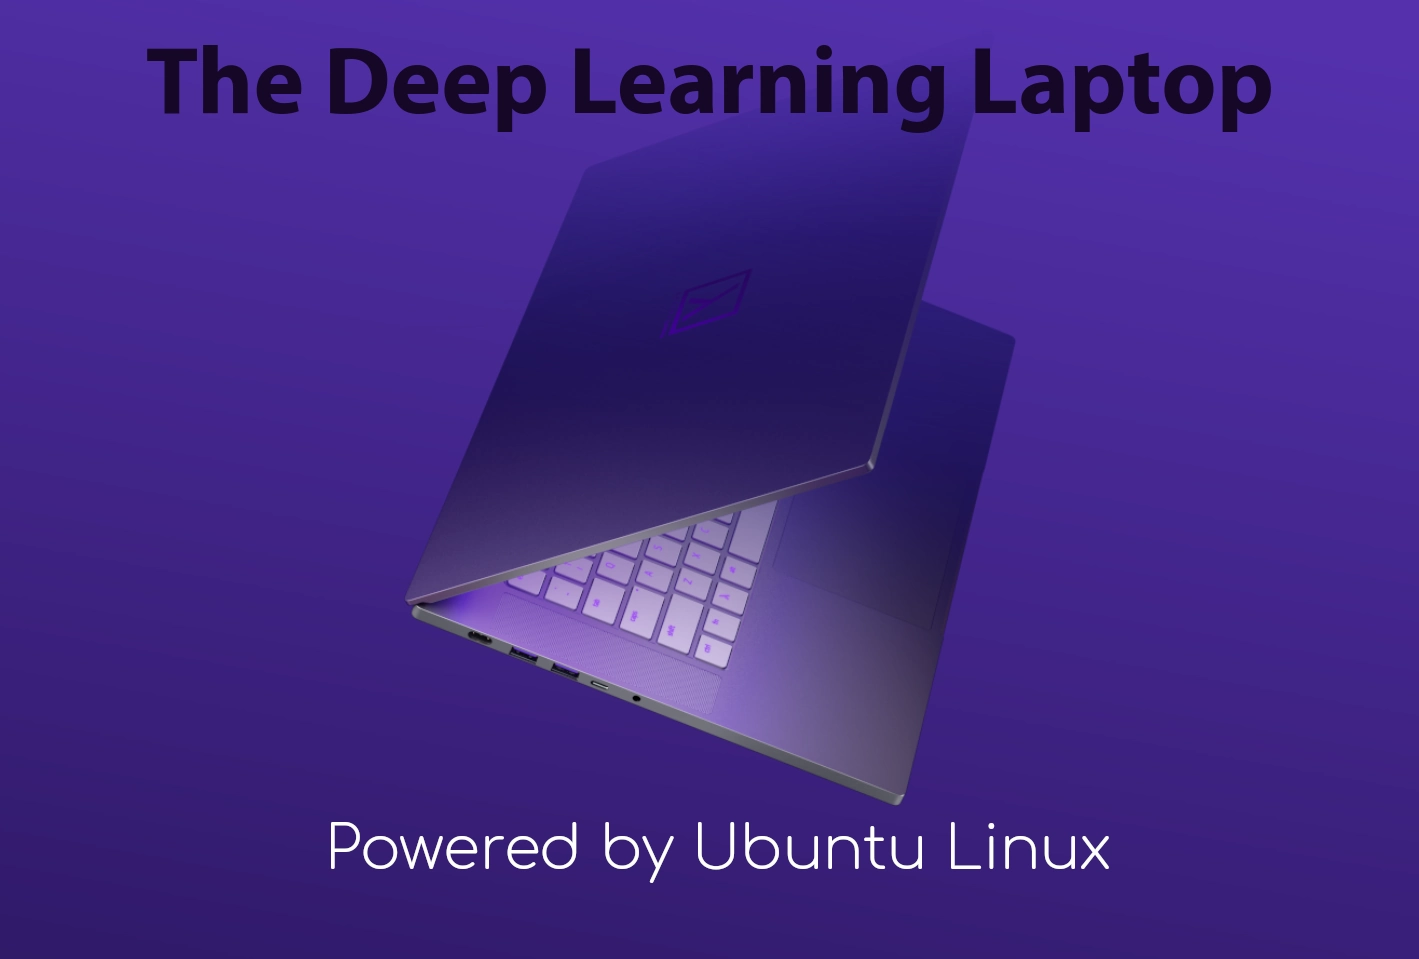 Lambda Launches World’s Most Powerful Ubuntu Linux Laptop for Deep Learning